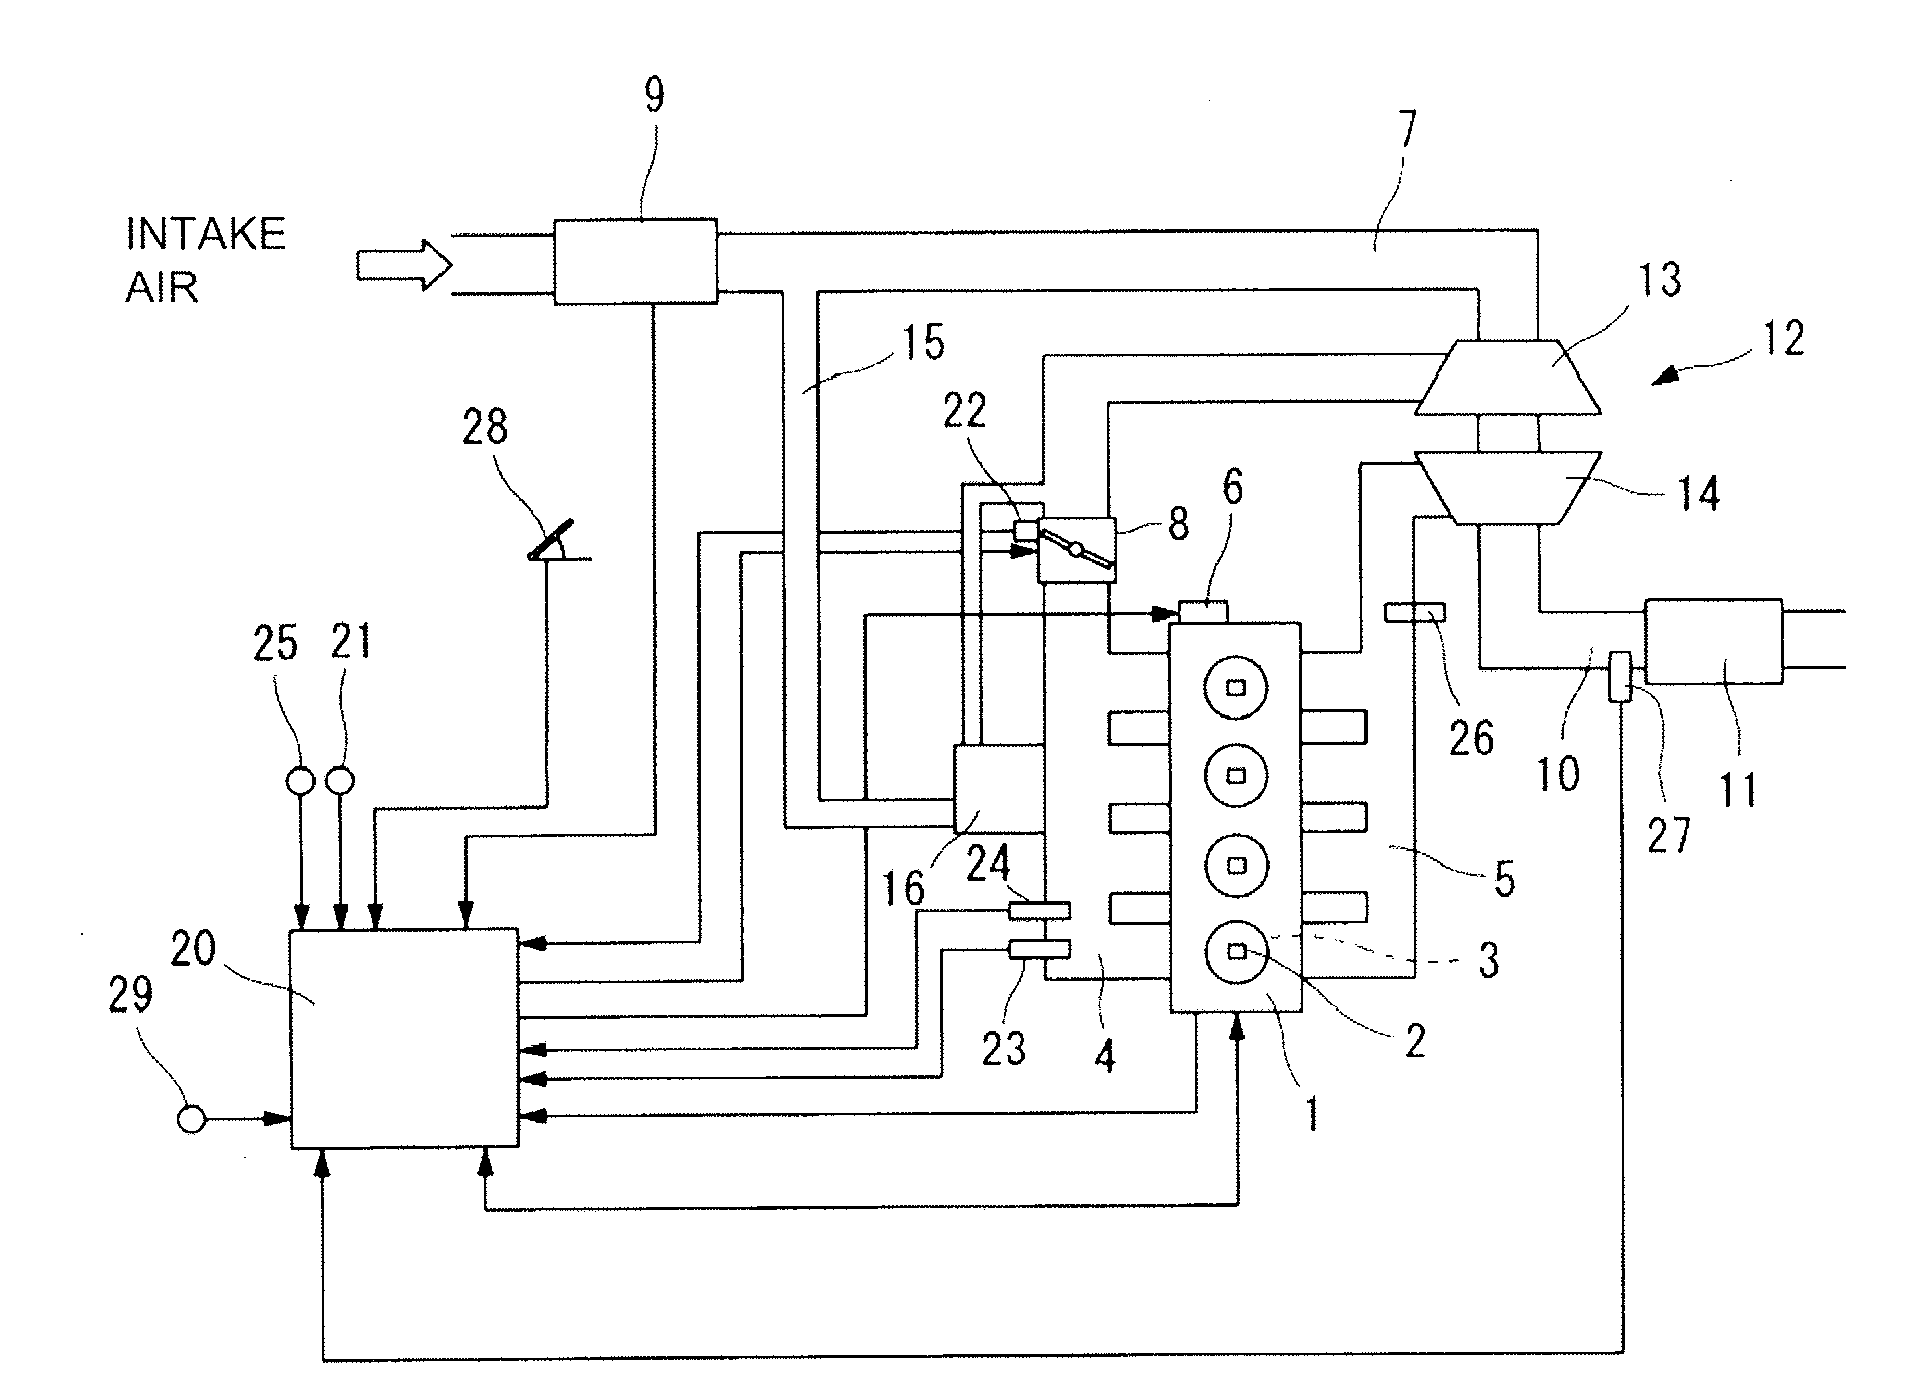 Control system for an internal combustion engine